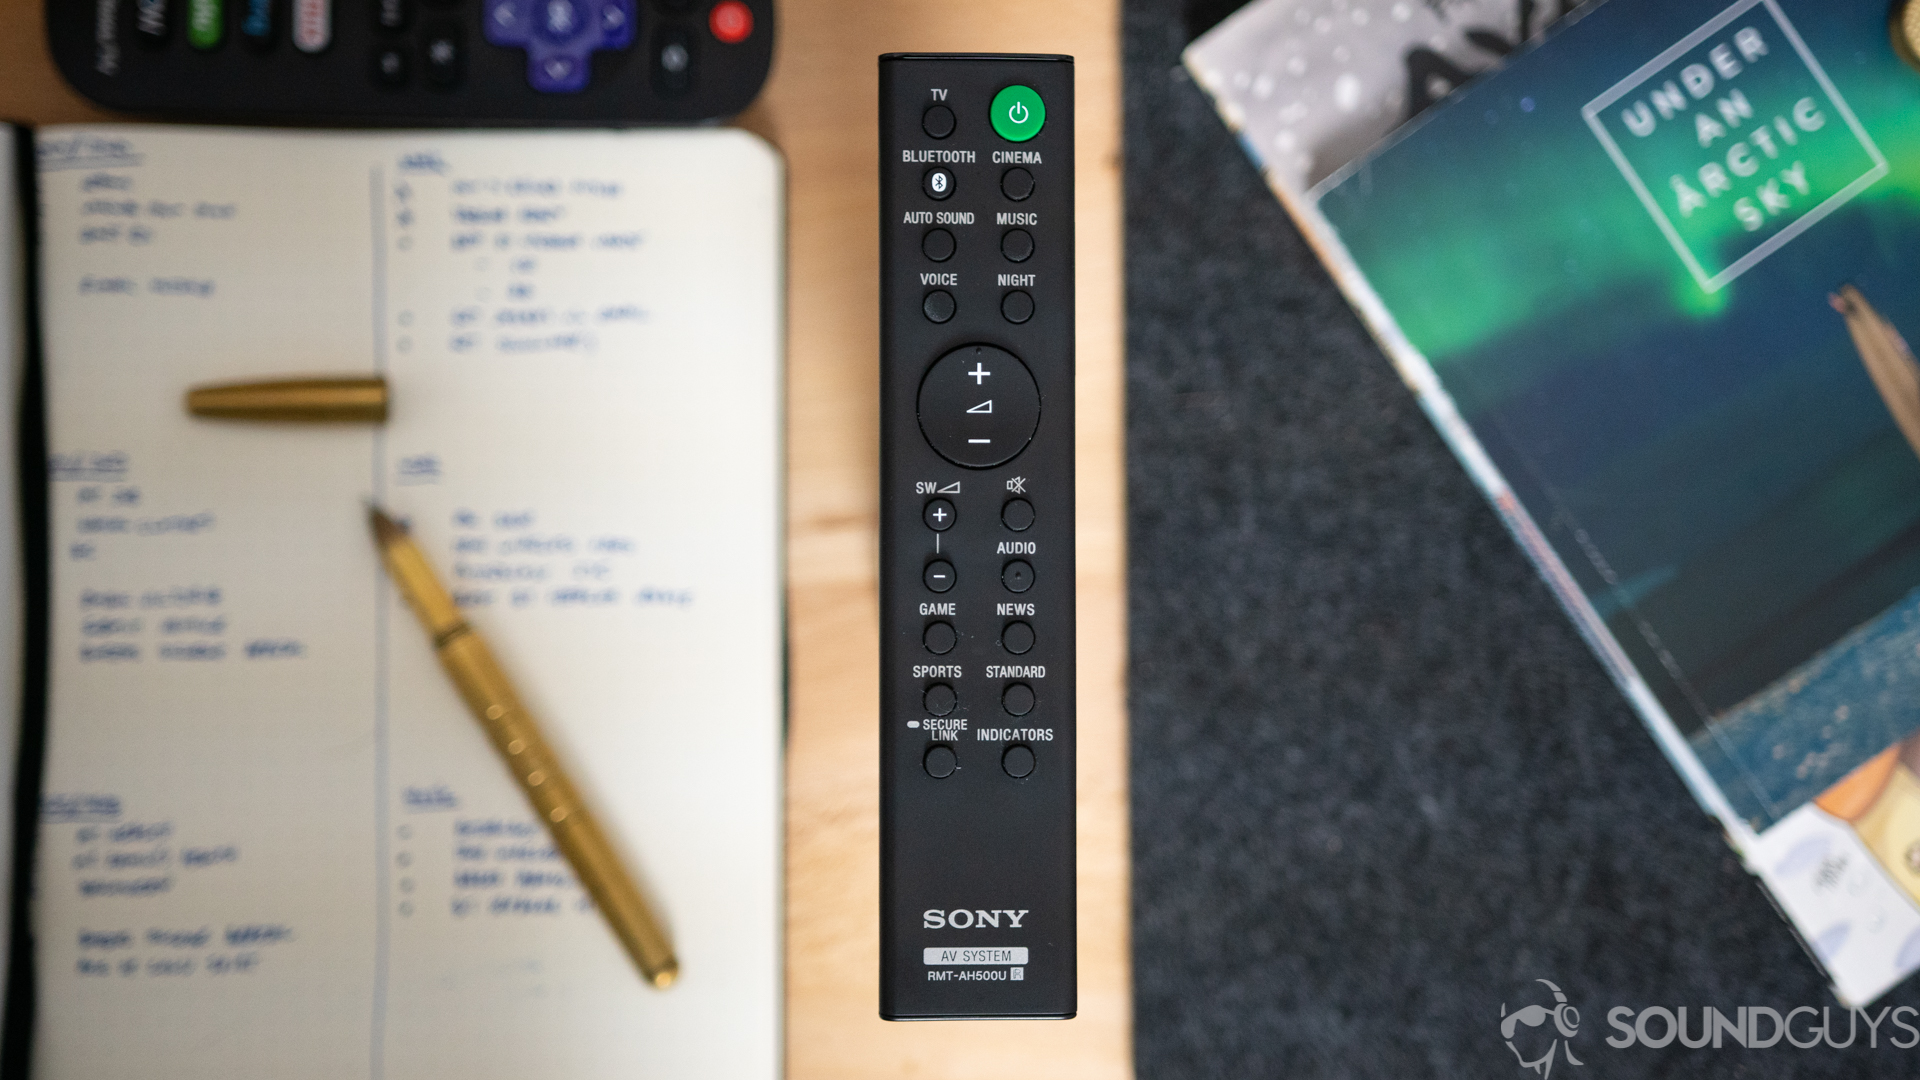 Close up of the Sony HT-S350 remote control